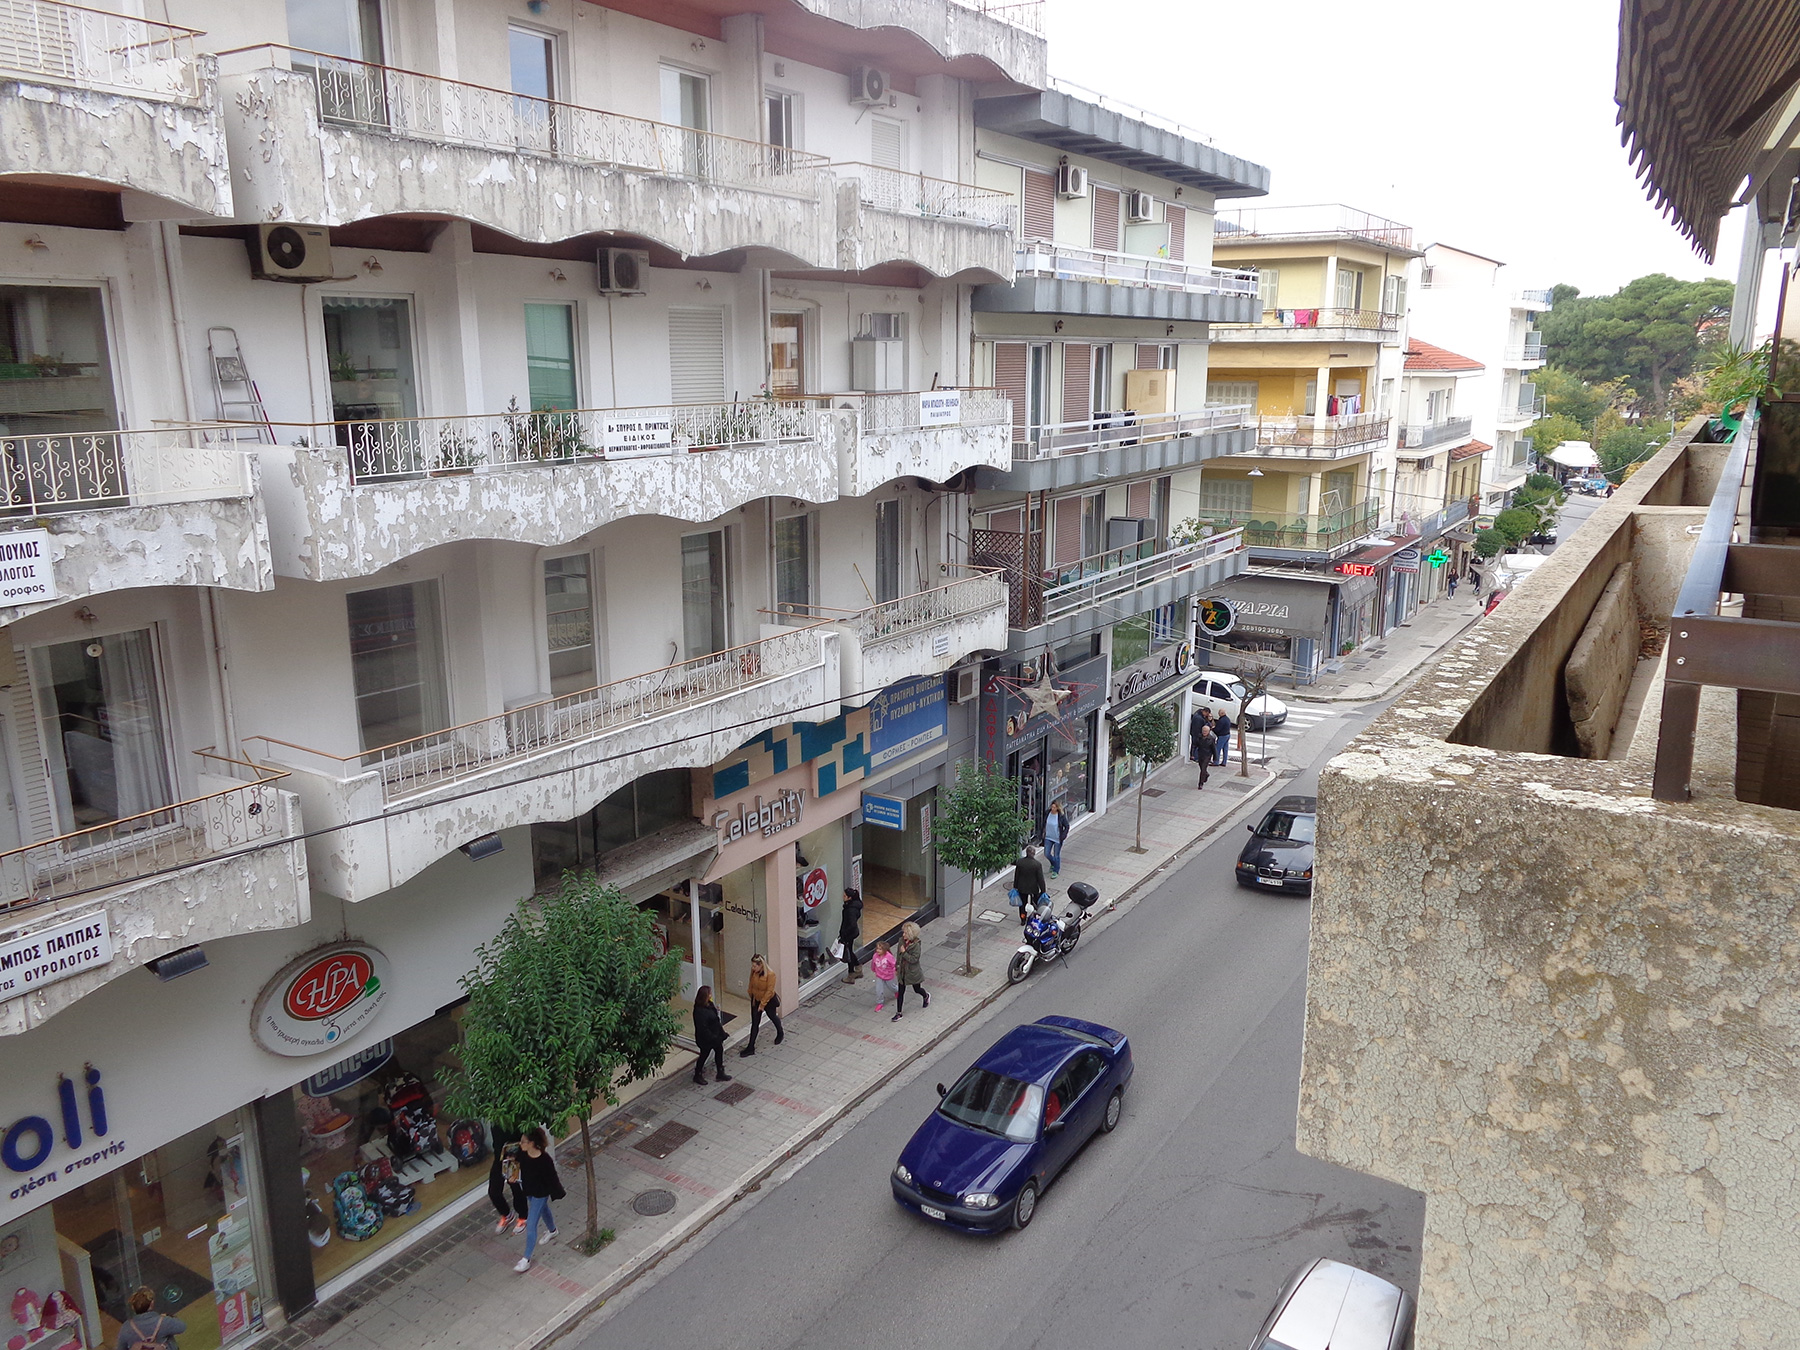 For sale 3-storey apartment building with shops at 28th of October in the center of Ioannina